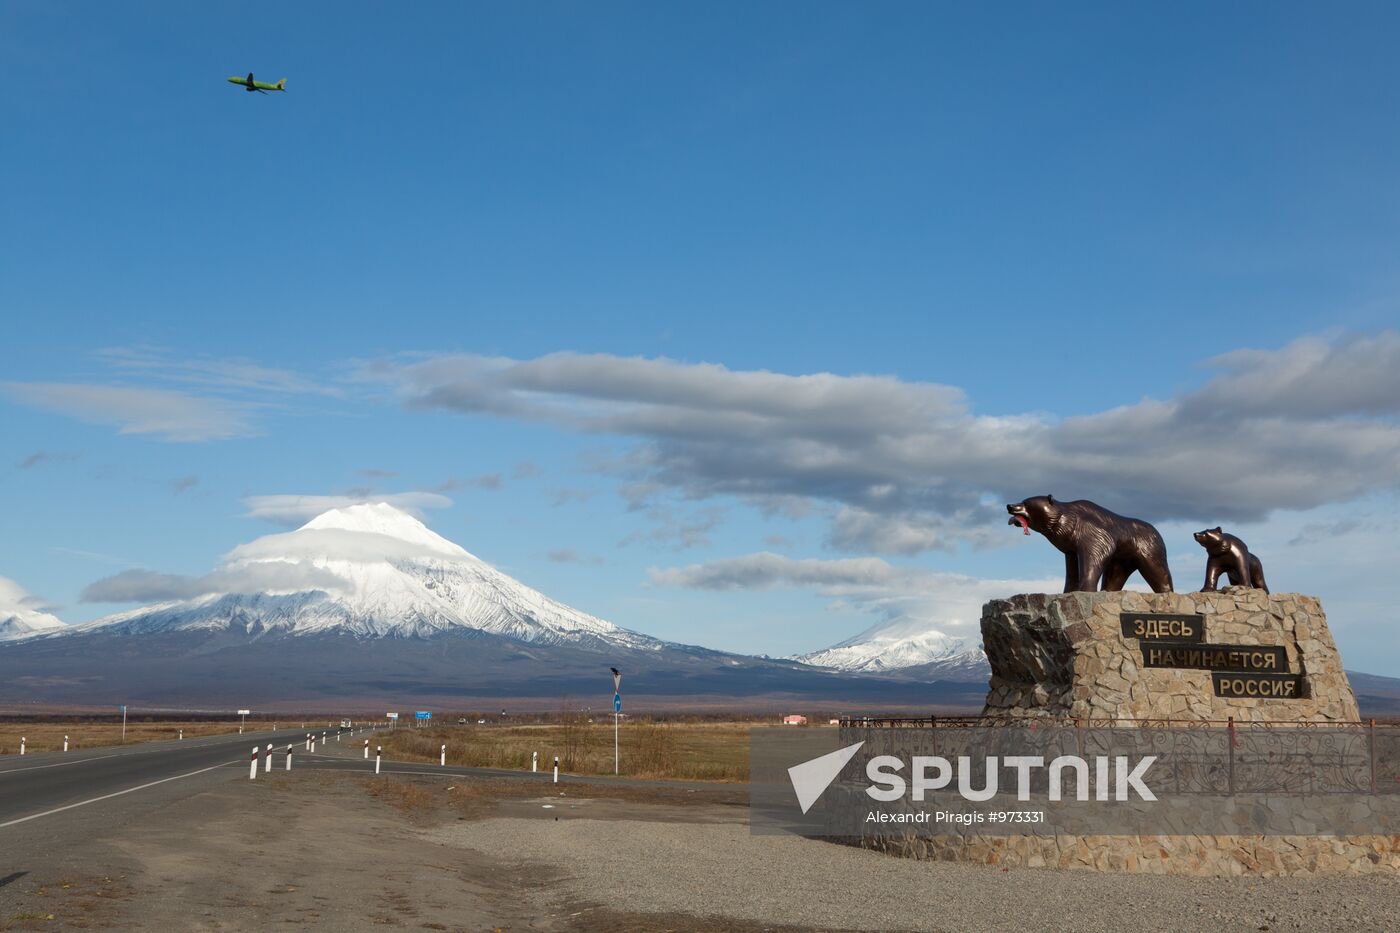 "She-bear with Cub" monument in Kamchatka Territory